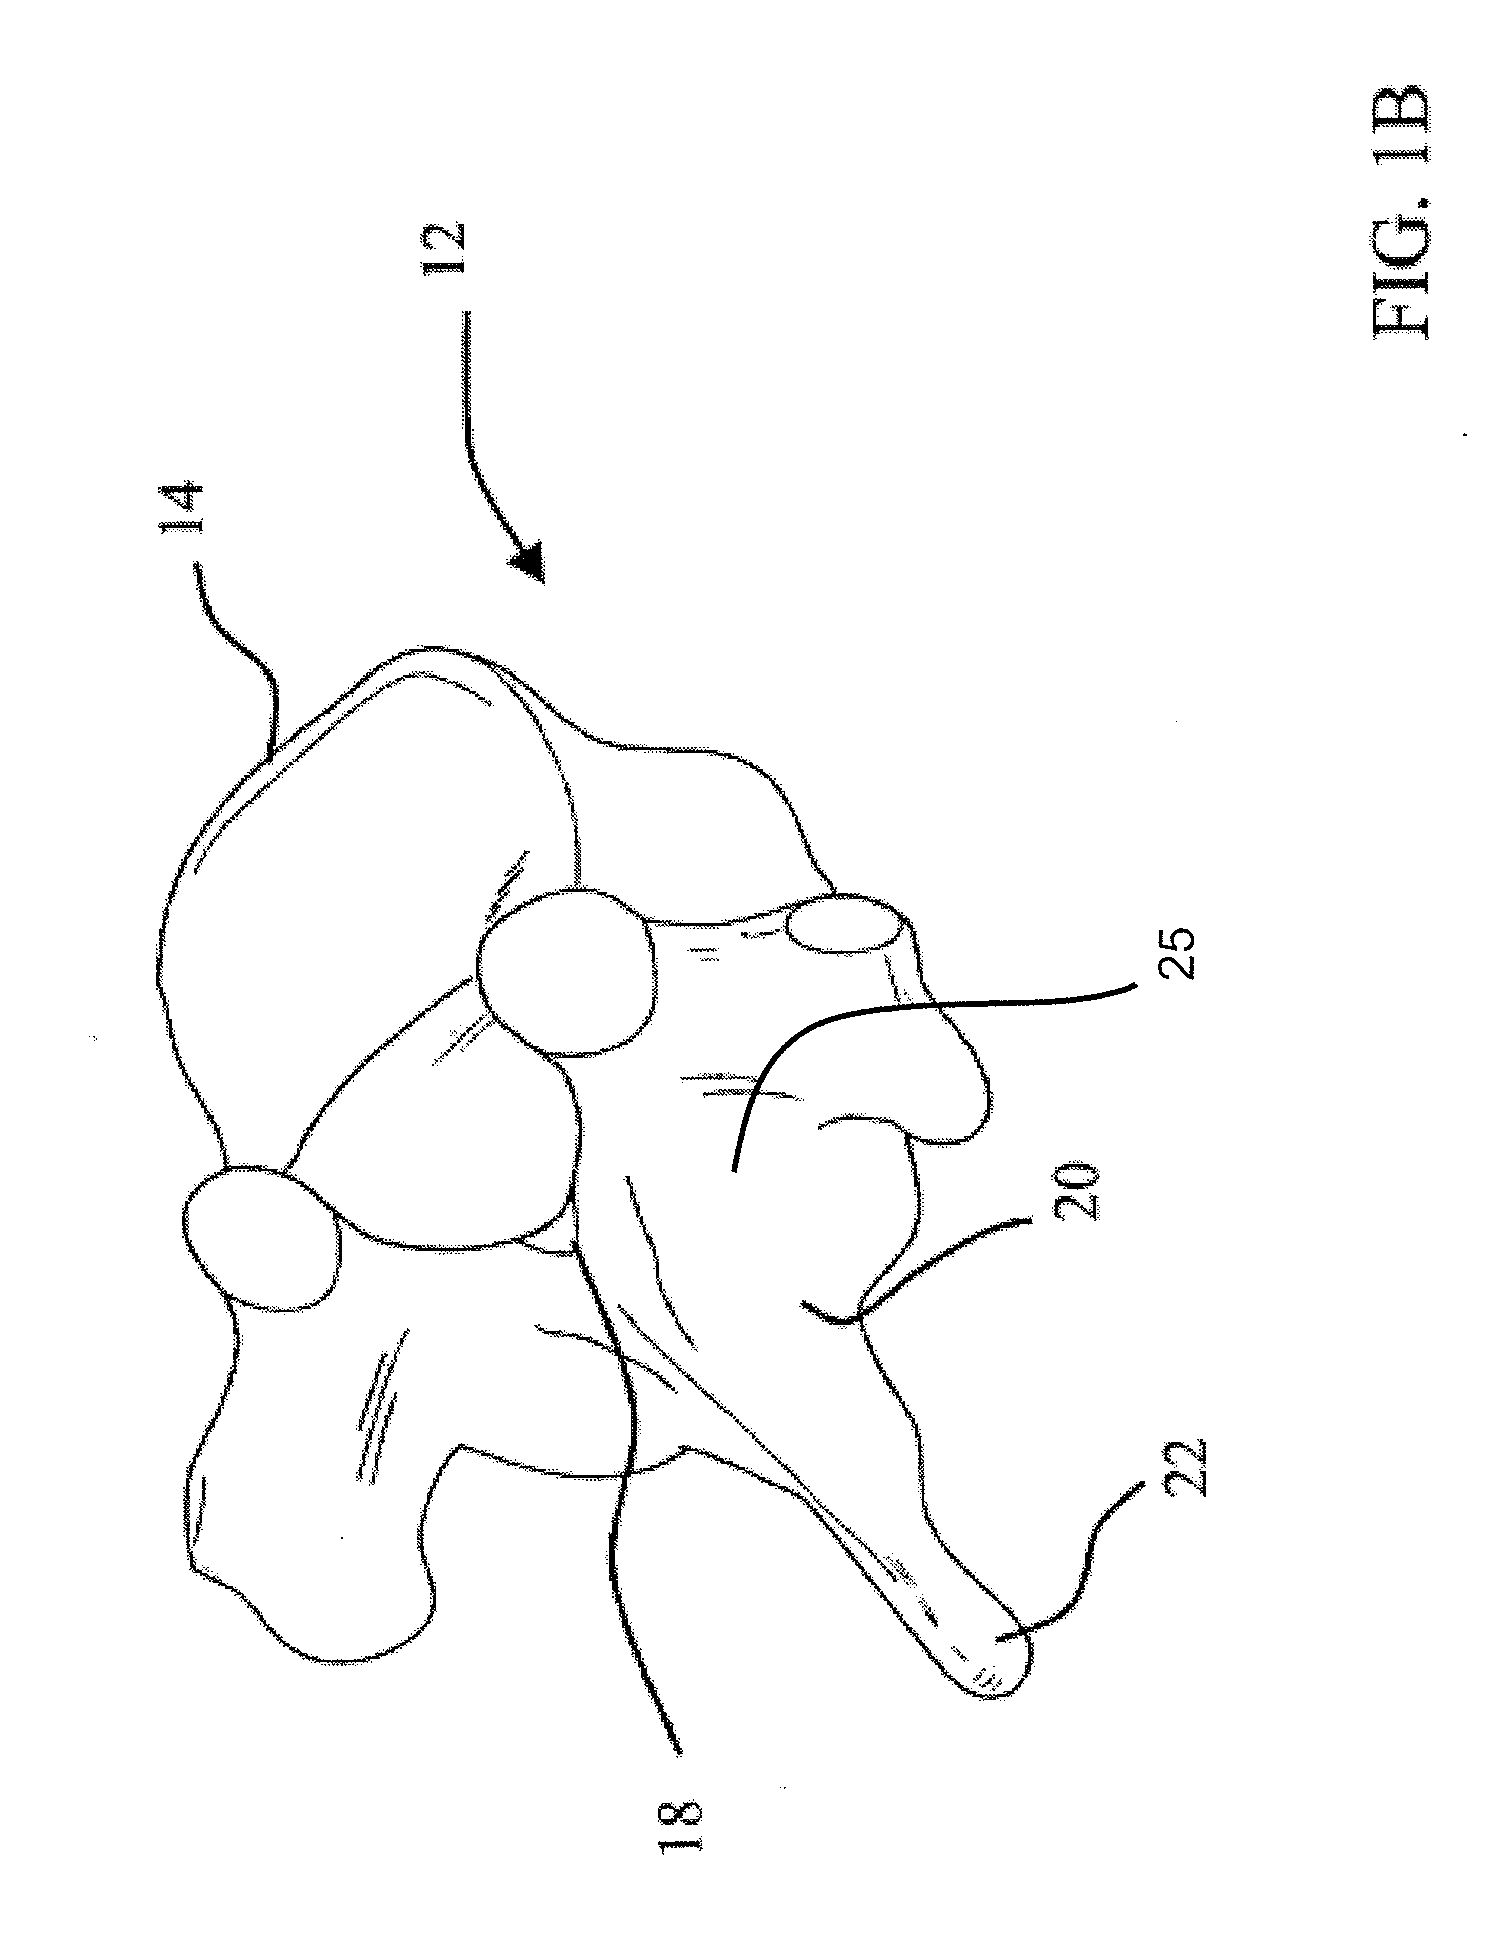 Systems, devices and methods for stabilizing bone